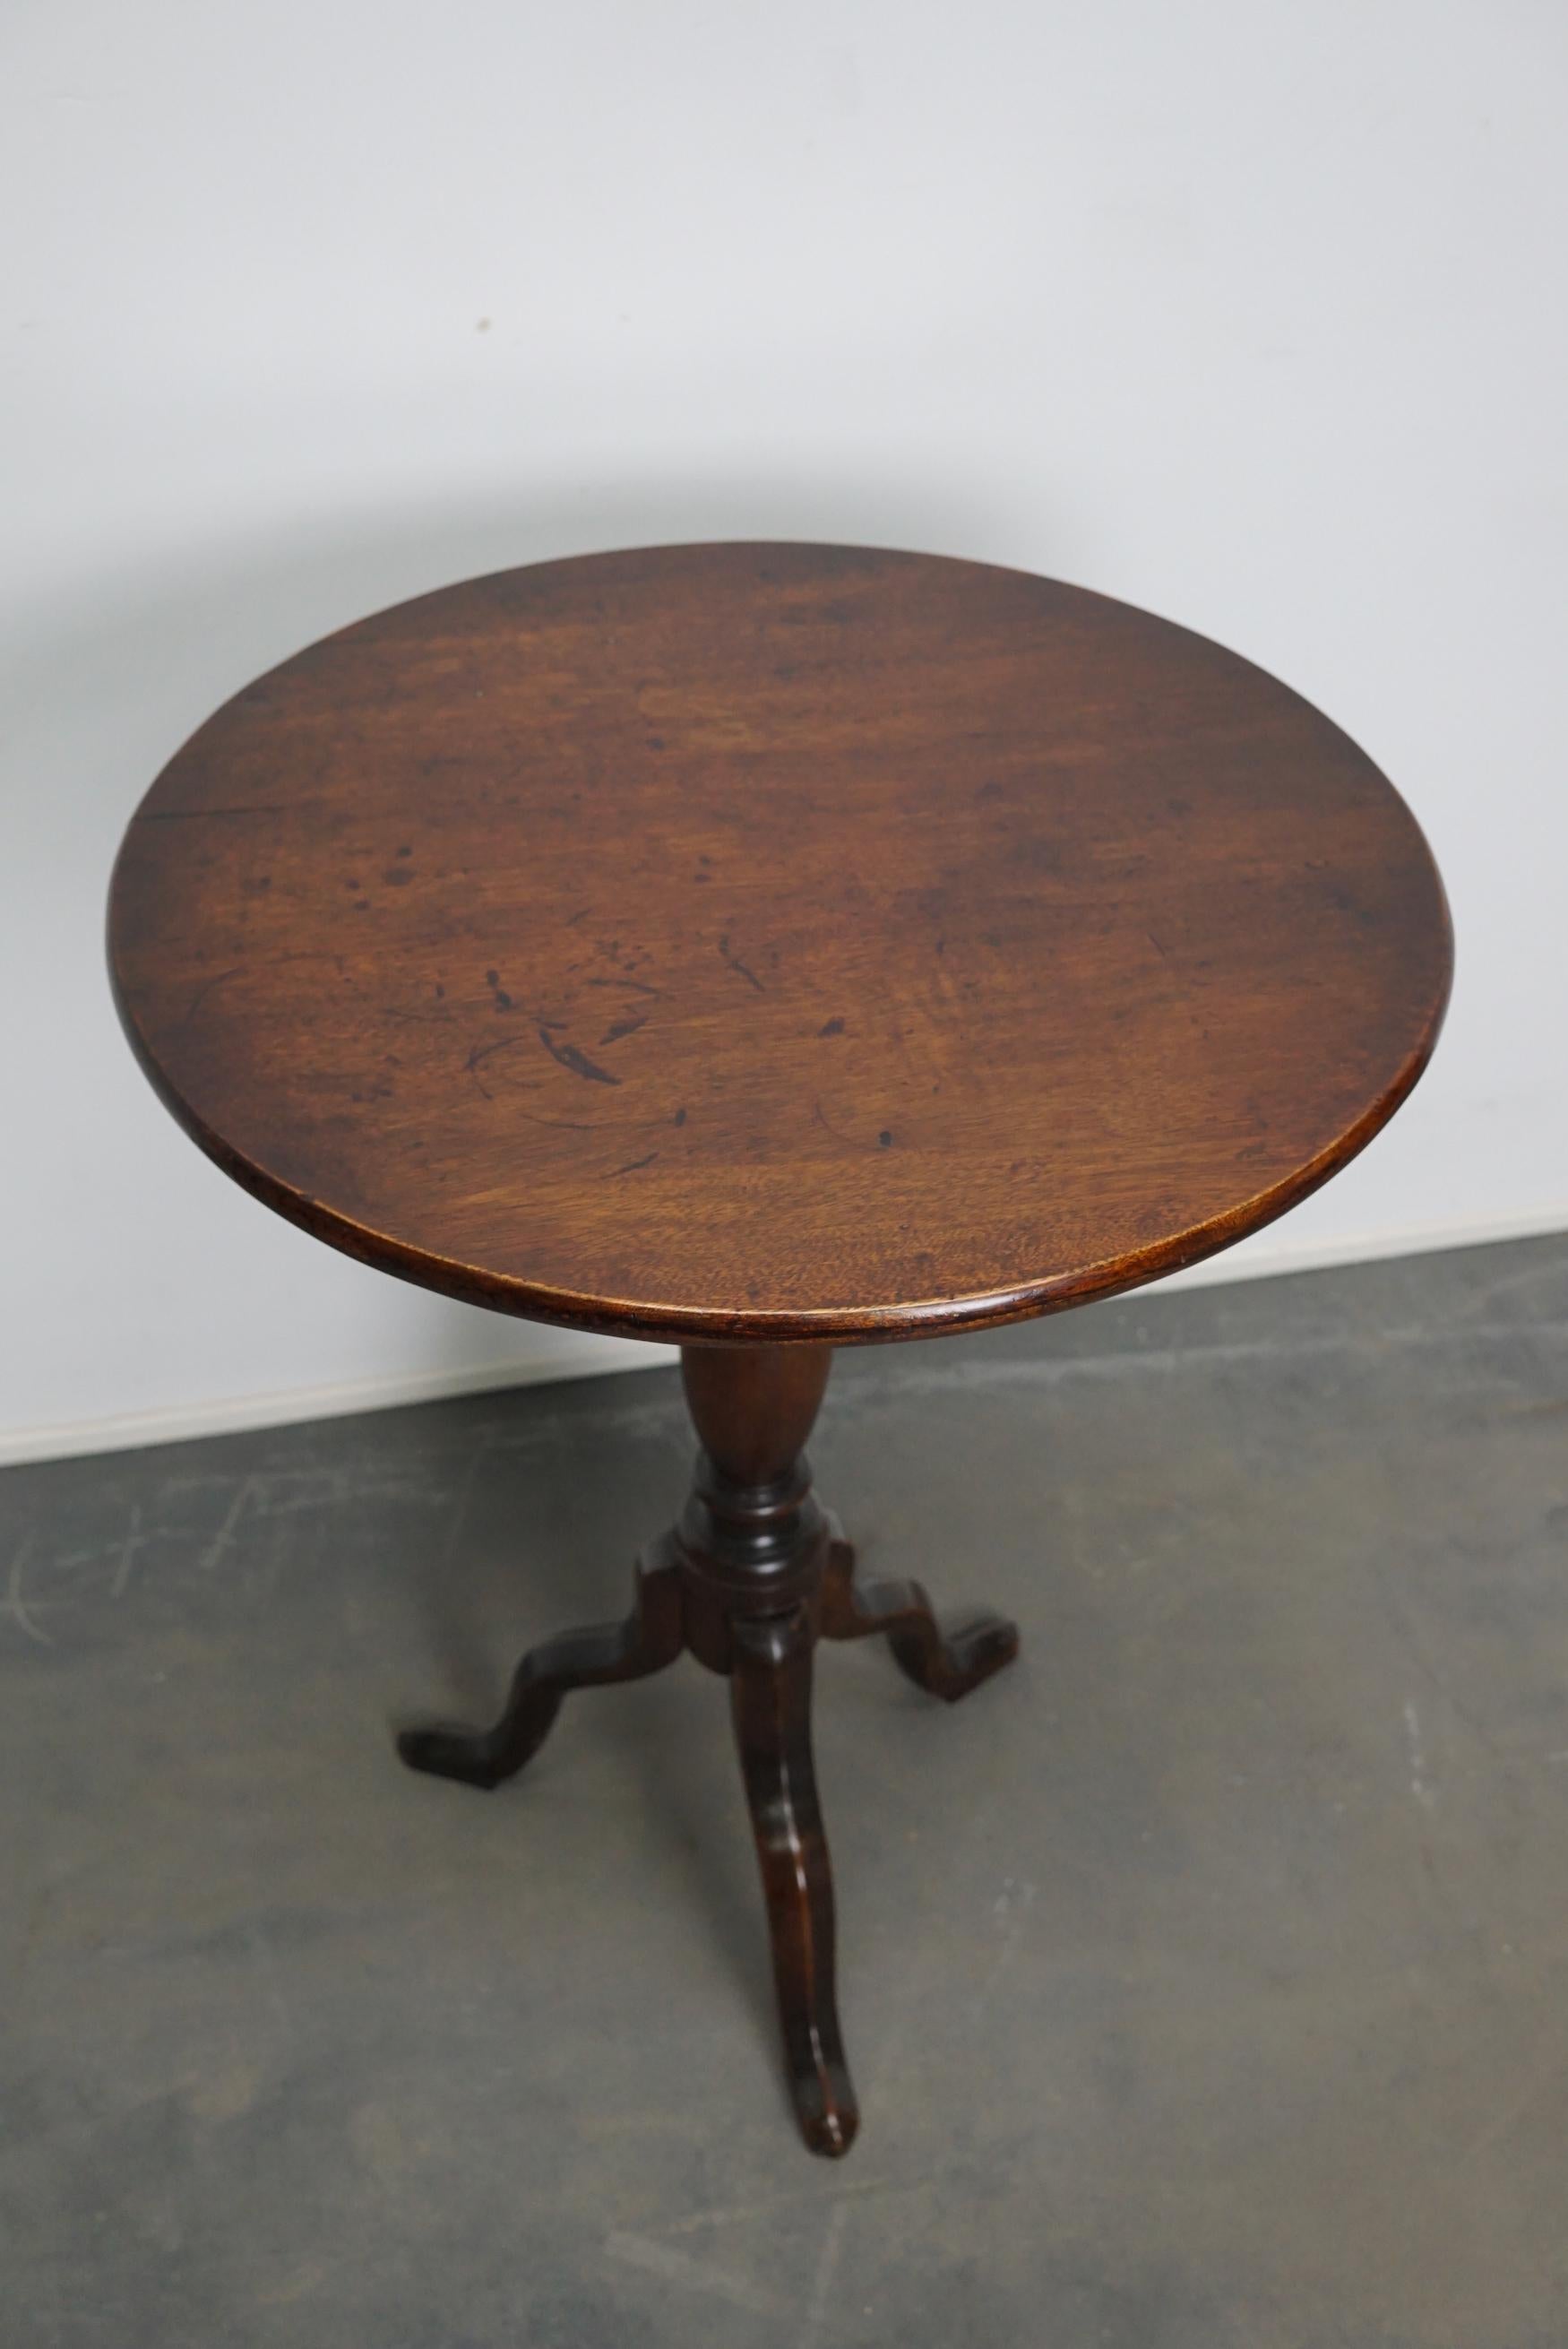 Lovely mahogany wine table from the 18th century. This table features a solid mahogany tilt top on tripod legs. The table has been restored and in a very nice condition.